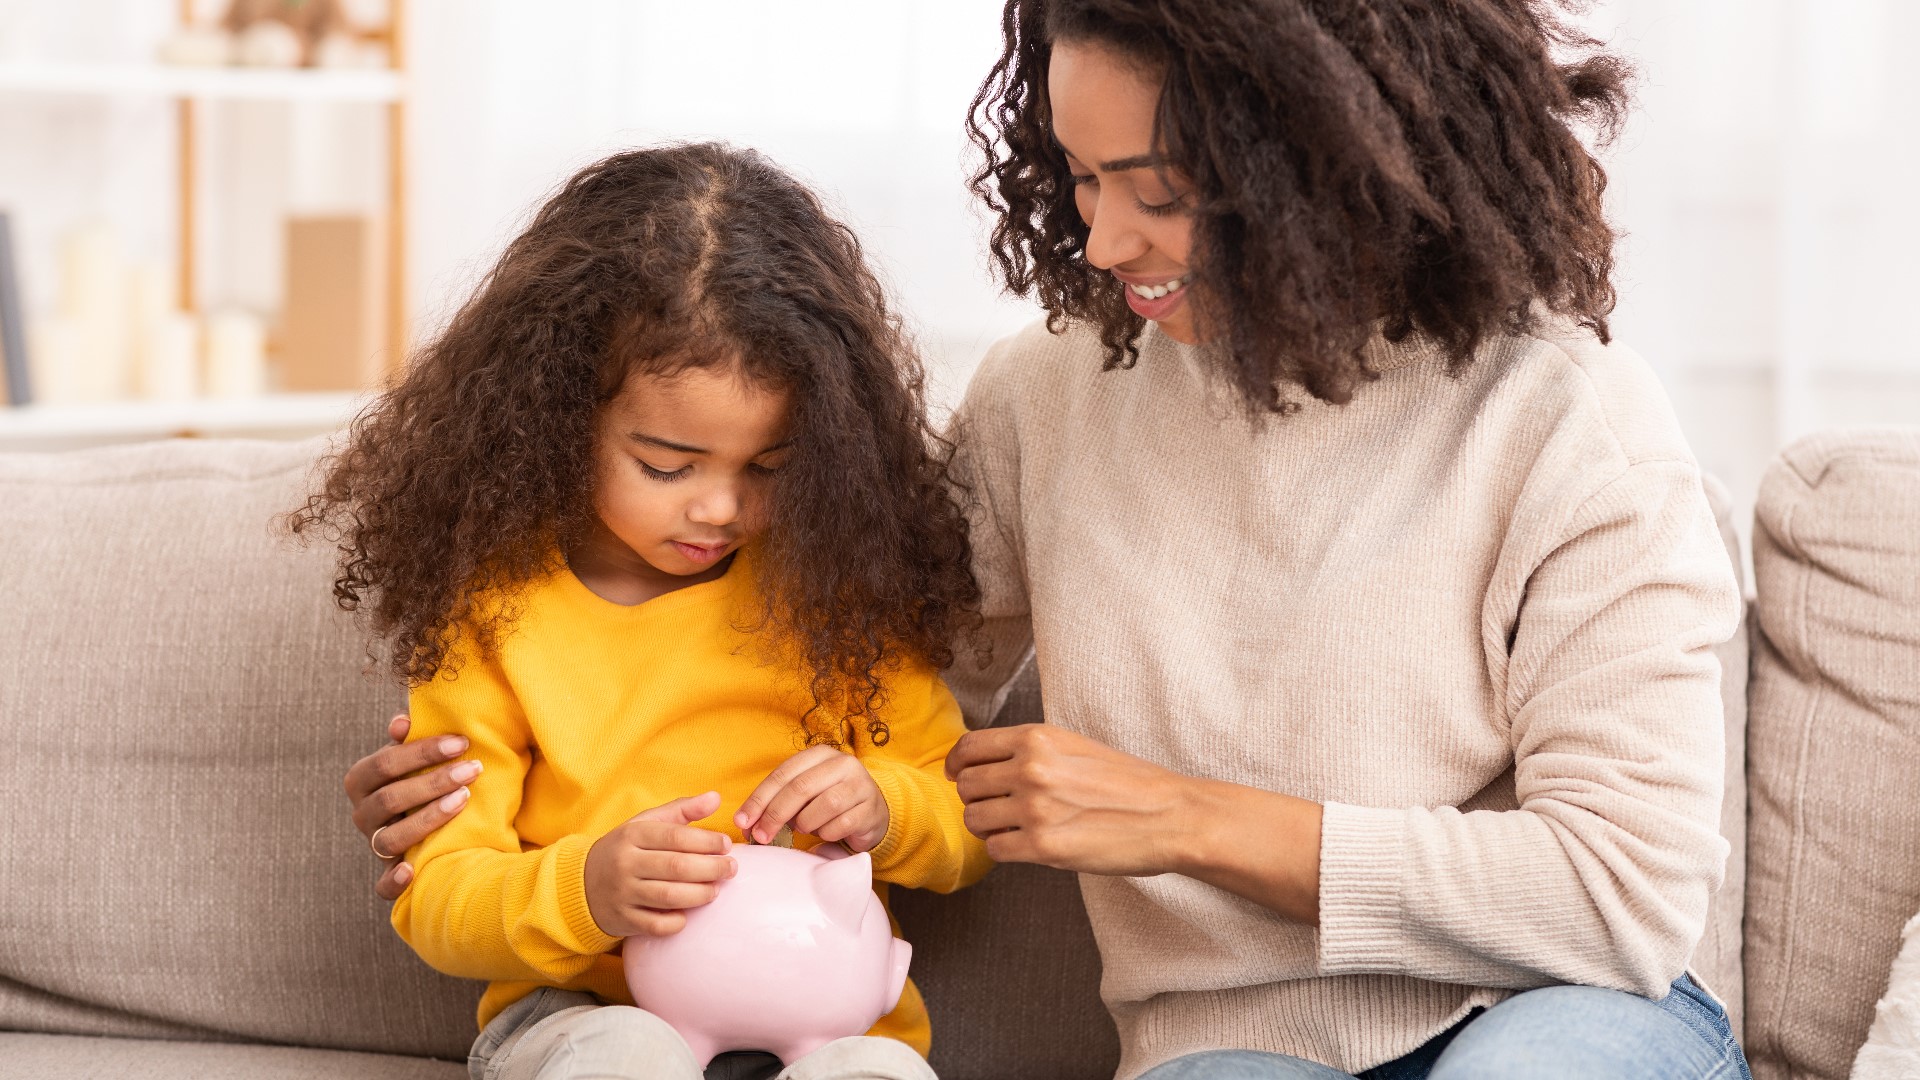 Harborstone and Junior Achievement of Washington are hosting age-appropriate sessions to instill financial responsibility. Sponsored by Harborstone.